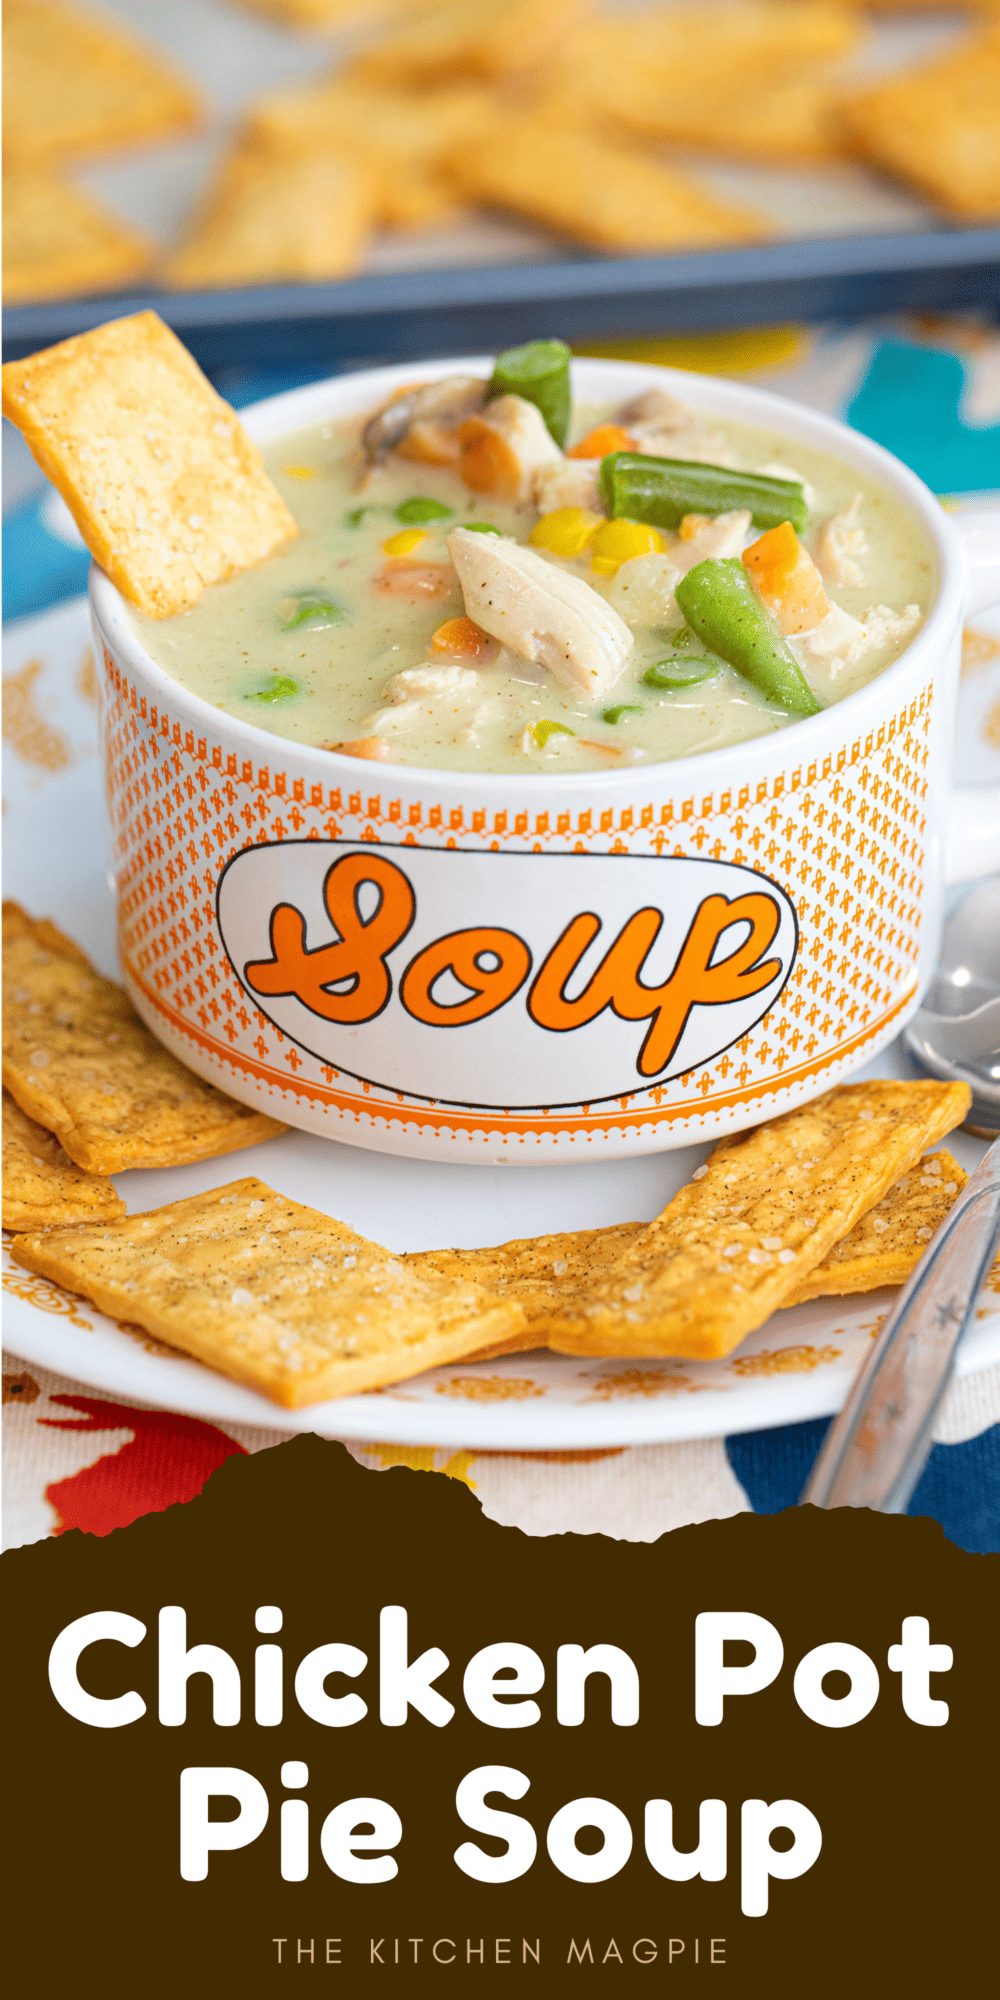 This hearty chicken pot pie soup has all the flavors of chicken pot pie but is way easier to make in soup form! The pie crust crackers are a great addition but can be skipped for a faster meal.